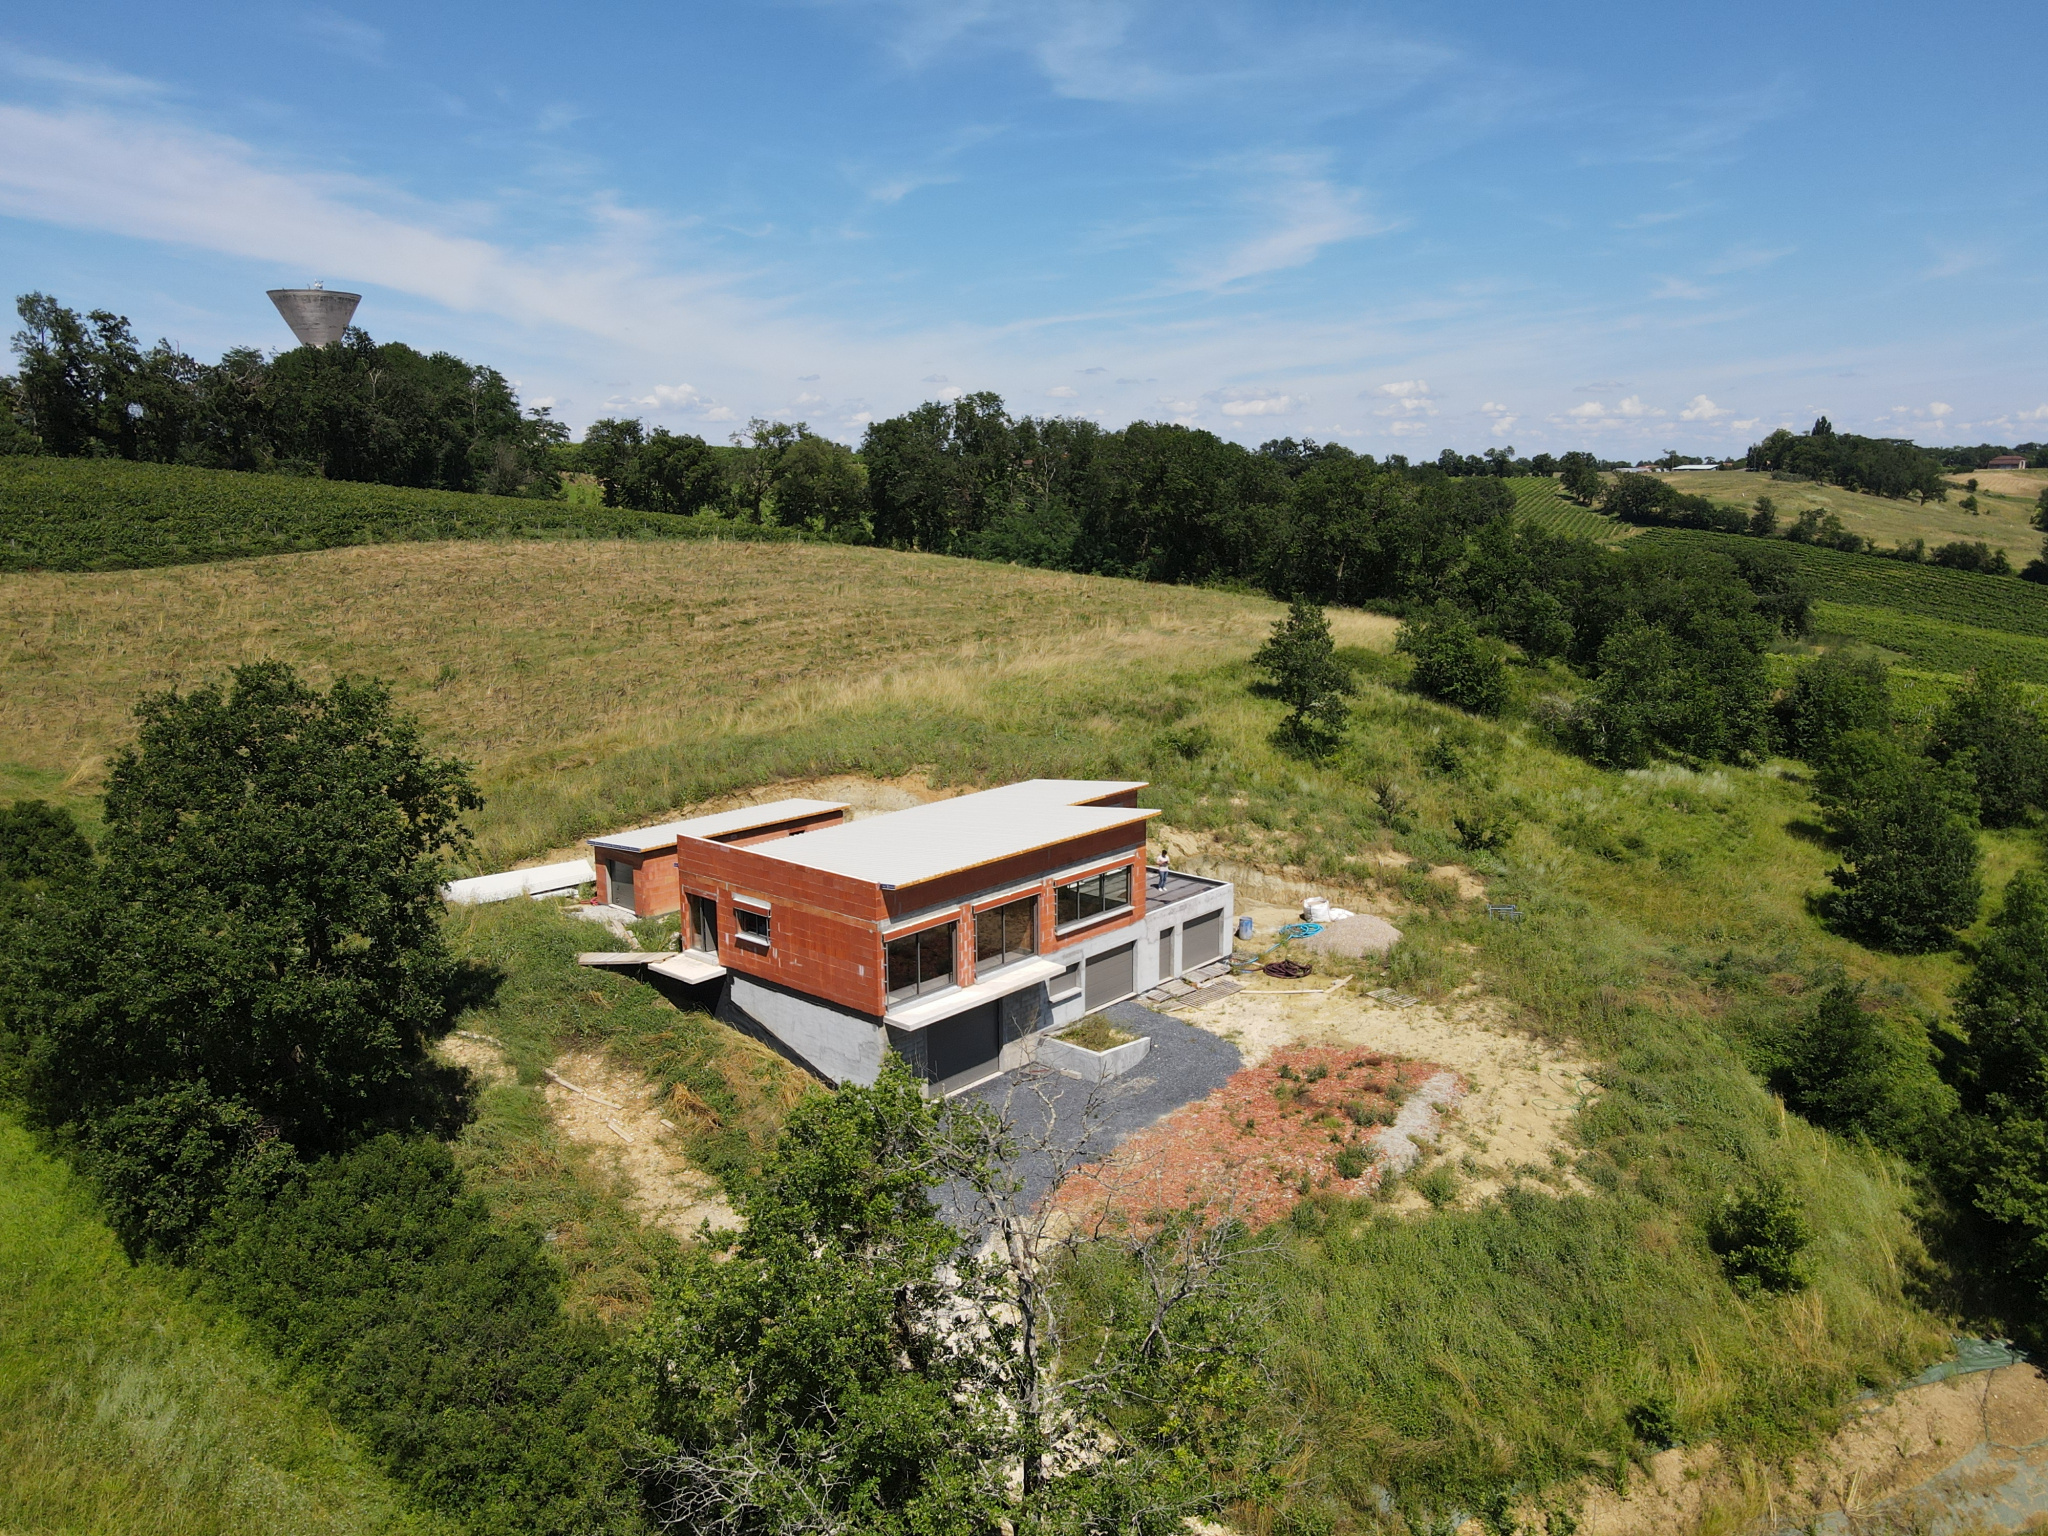 House to be finished with breathtaking views of the countryside and the Pyrenees